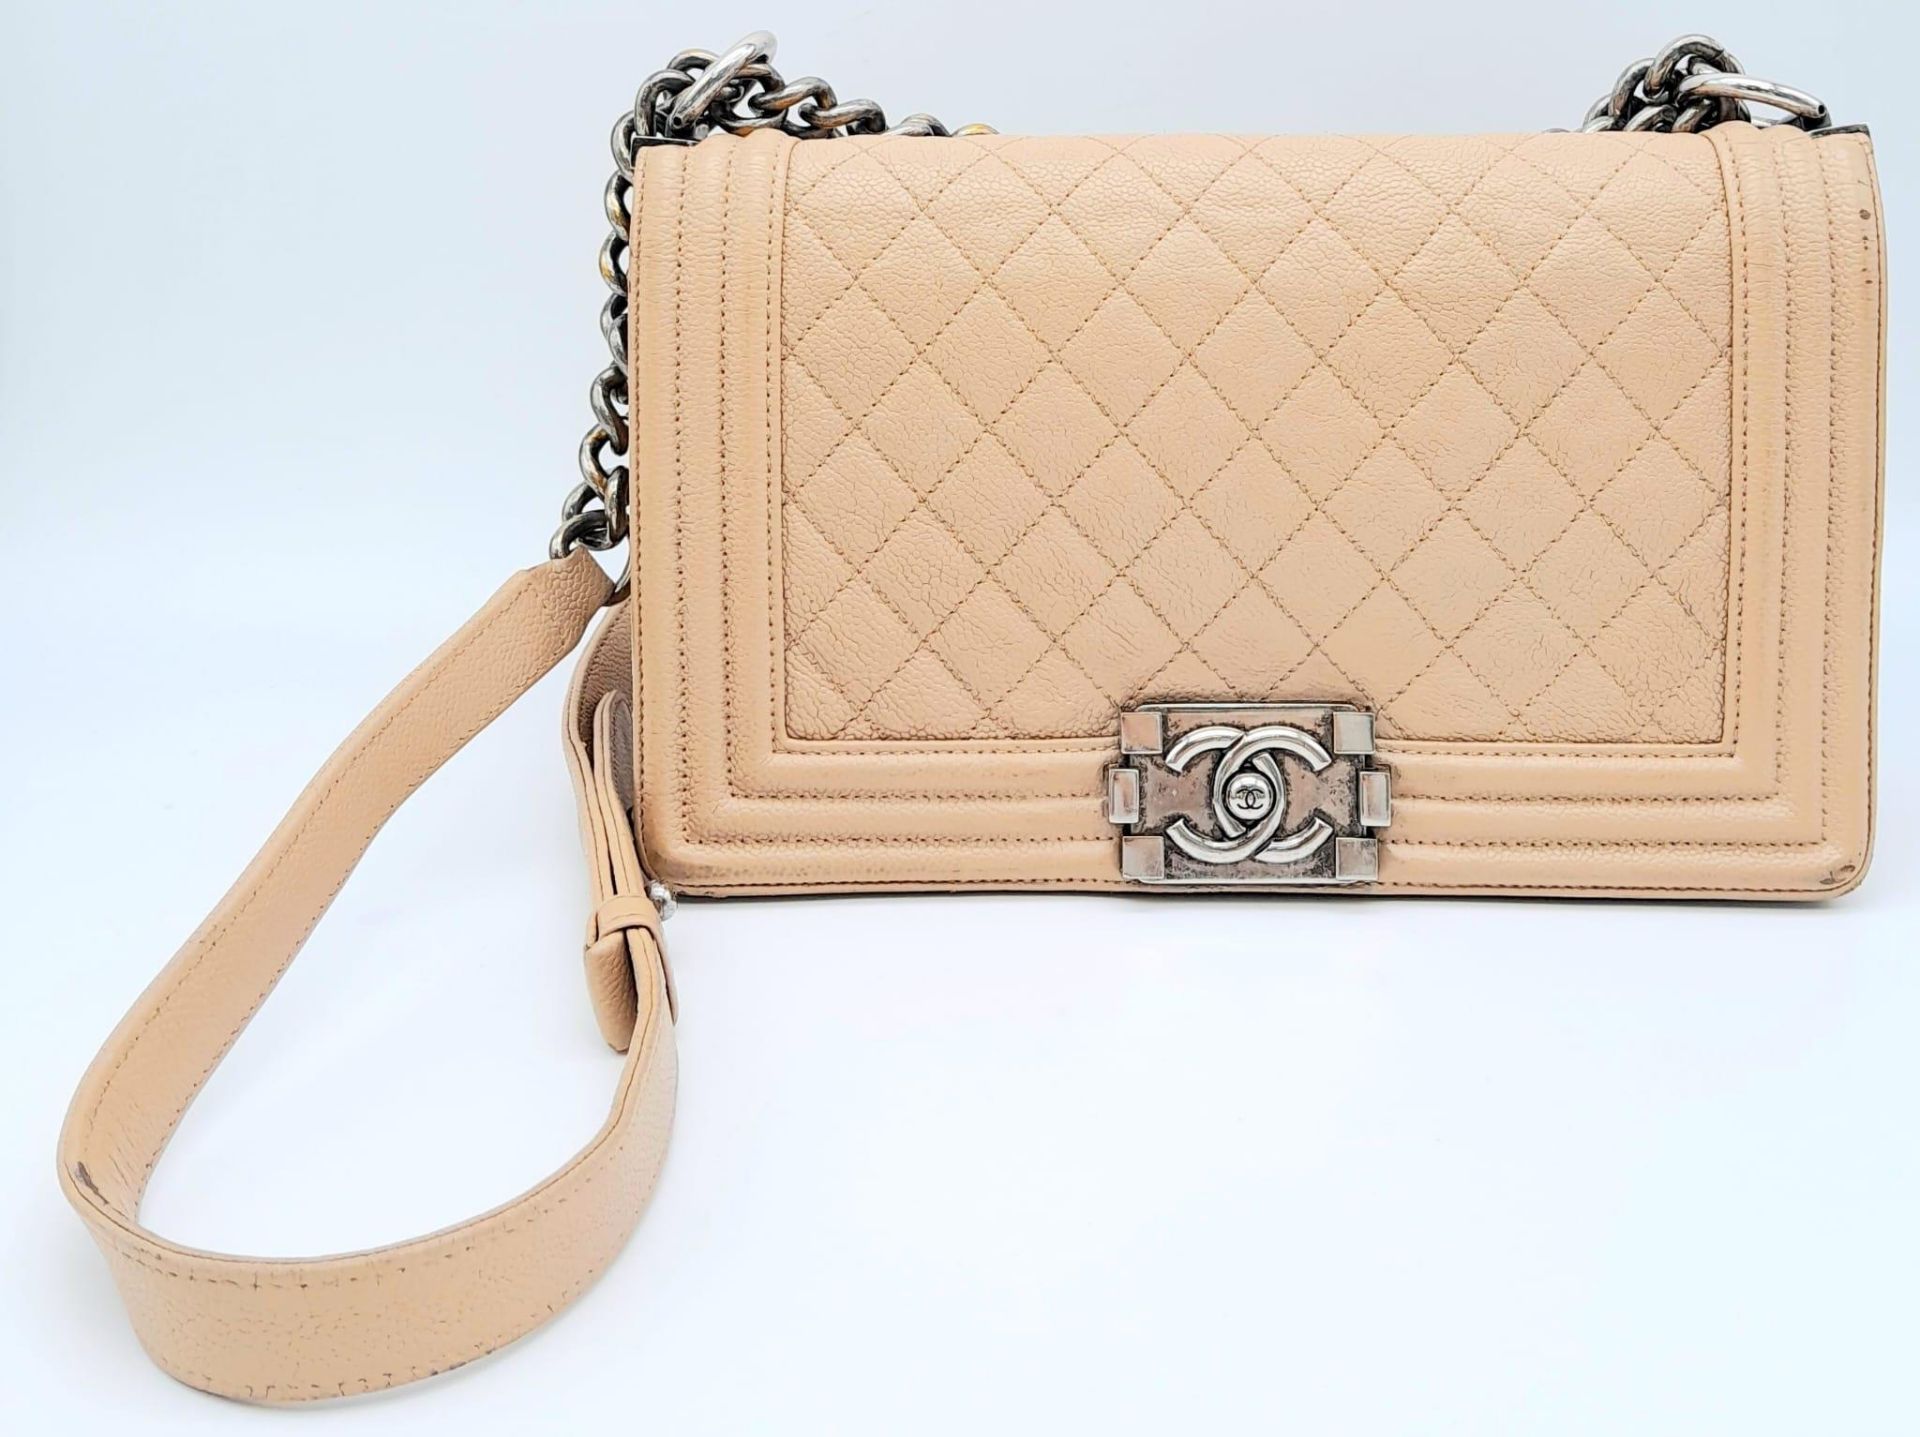 A Chanel Beige Boy Bag. Leather exterior with silver-toned hardware, chain and leather adjustable